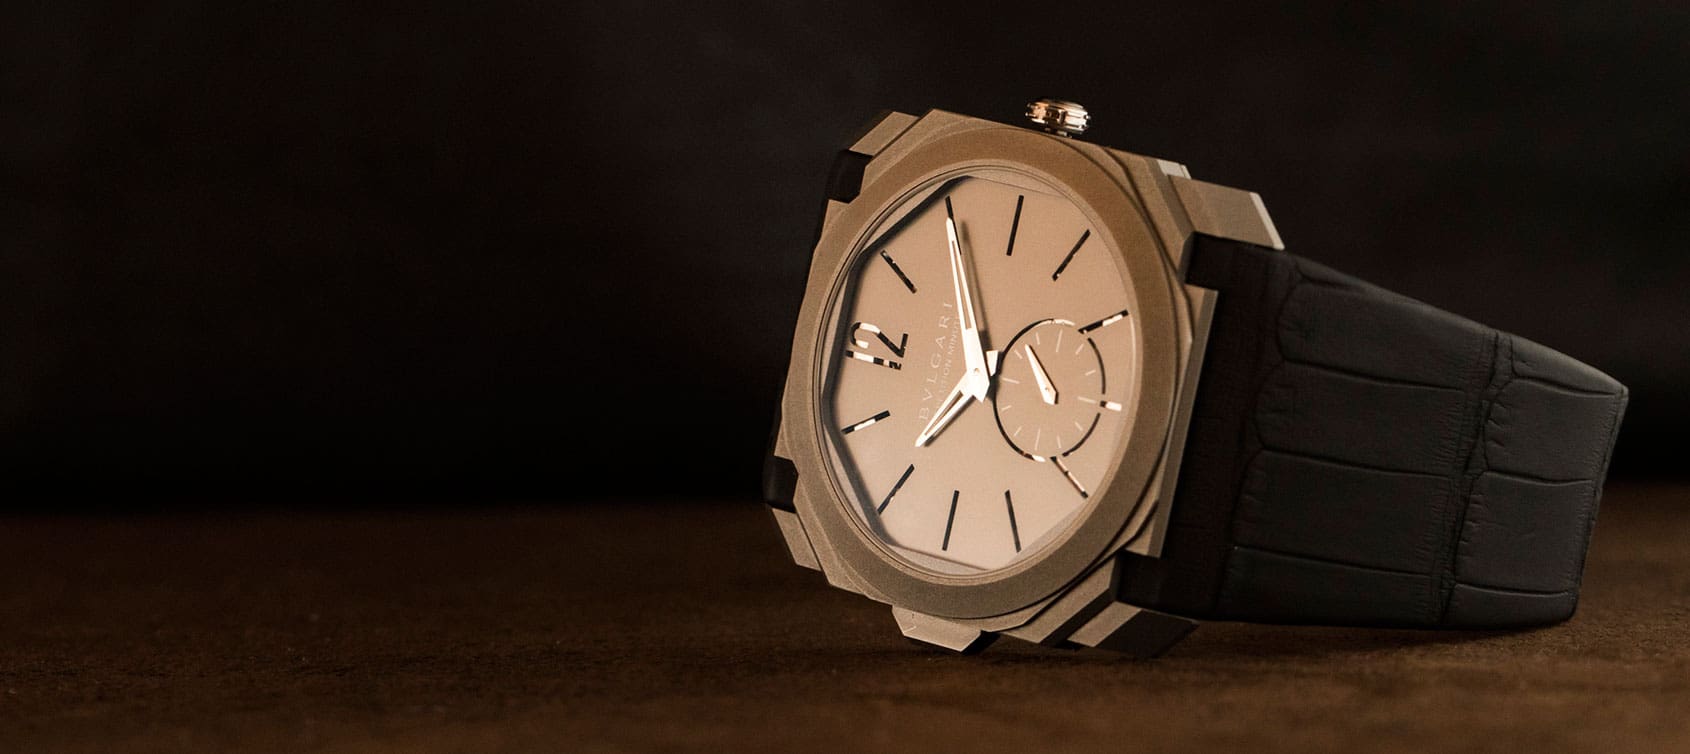 Bulgari Octo Finissimo Minute Repeater: Slender Looks and Sweet Sounds